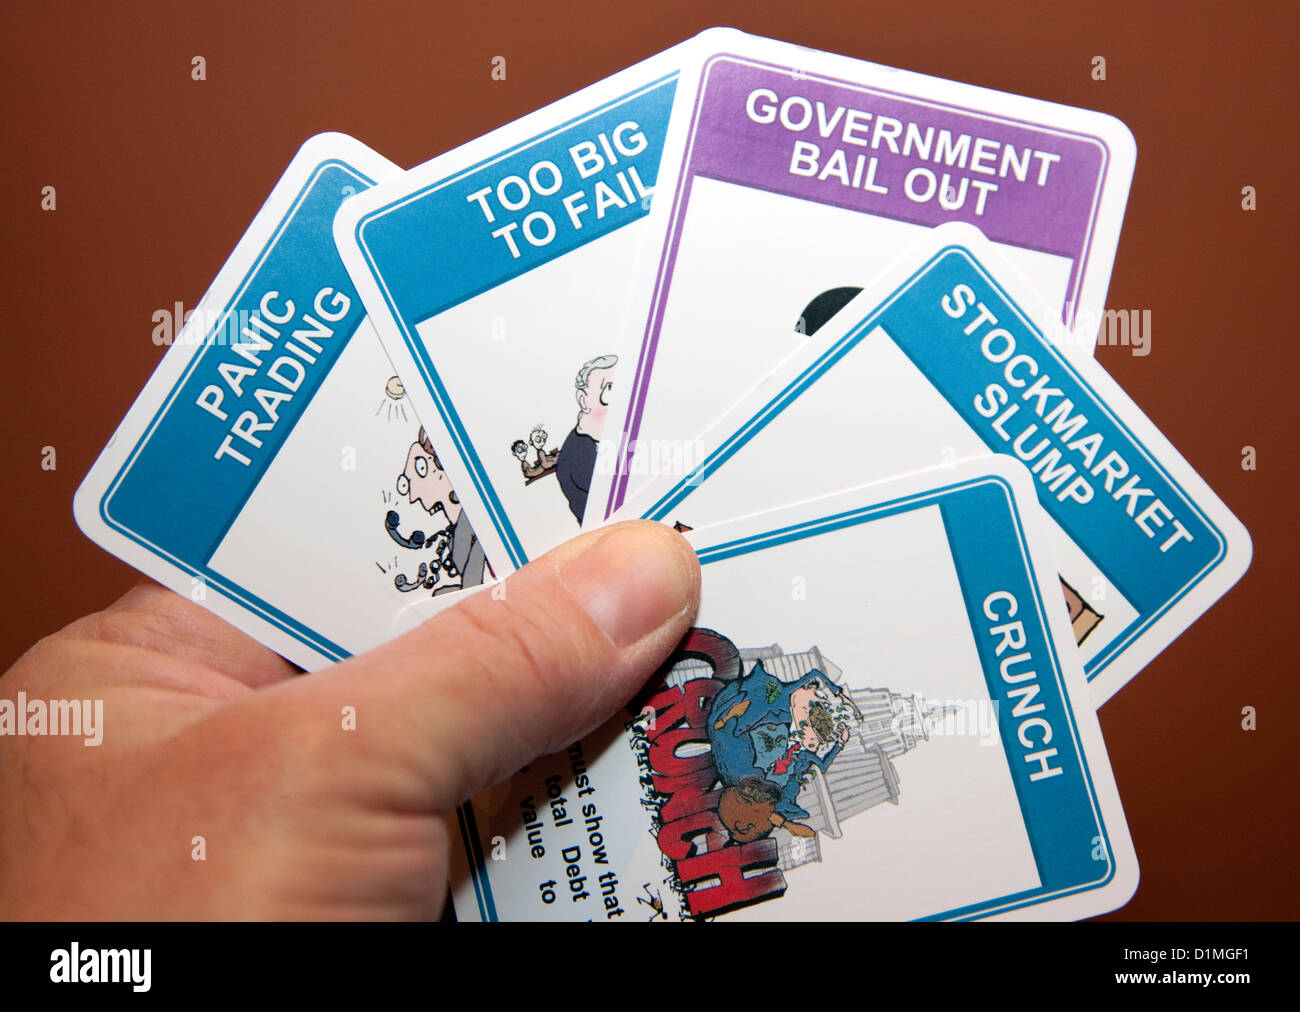 'Crunch': card game based on global financial crisis, London Stock Photo